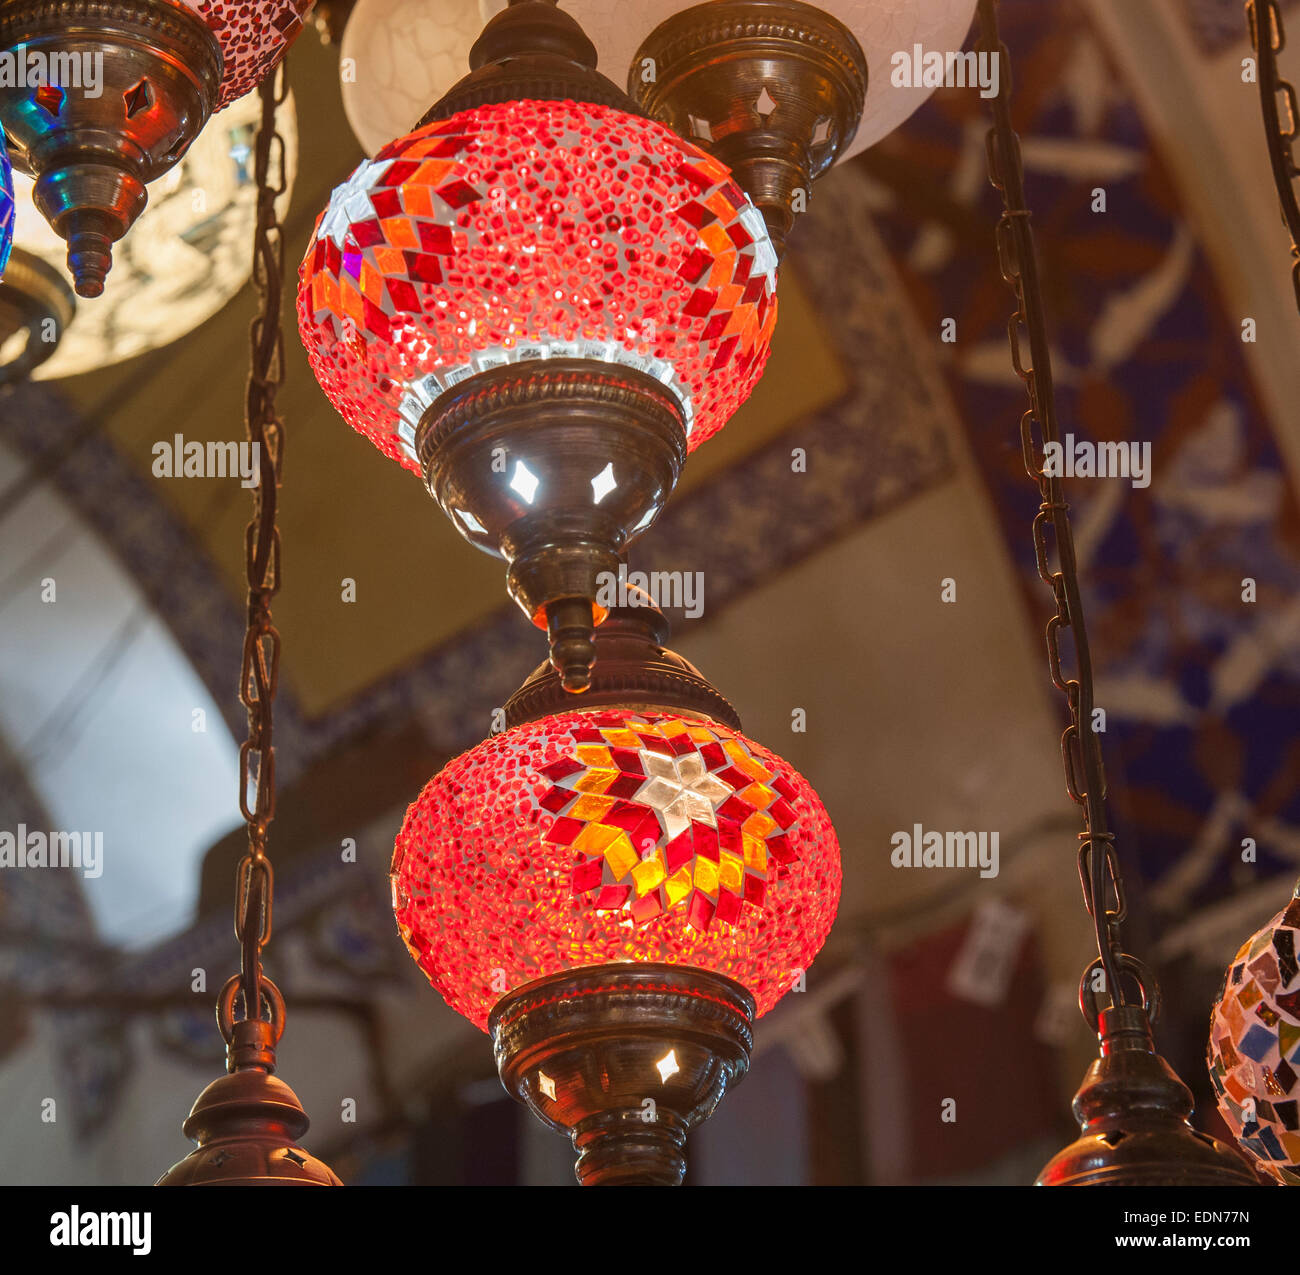 Ornate glass ceiling lights hanging at a bazaar market souk stall Stock Photo